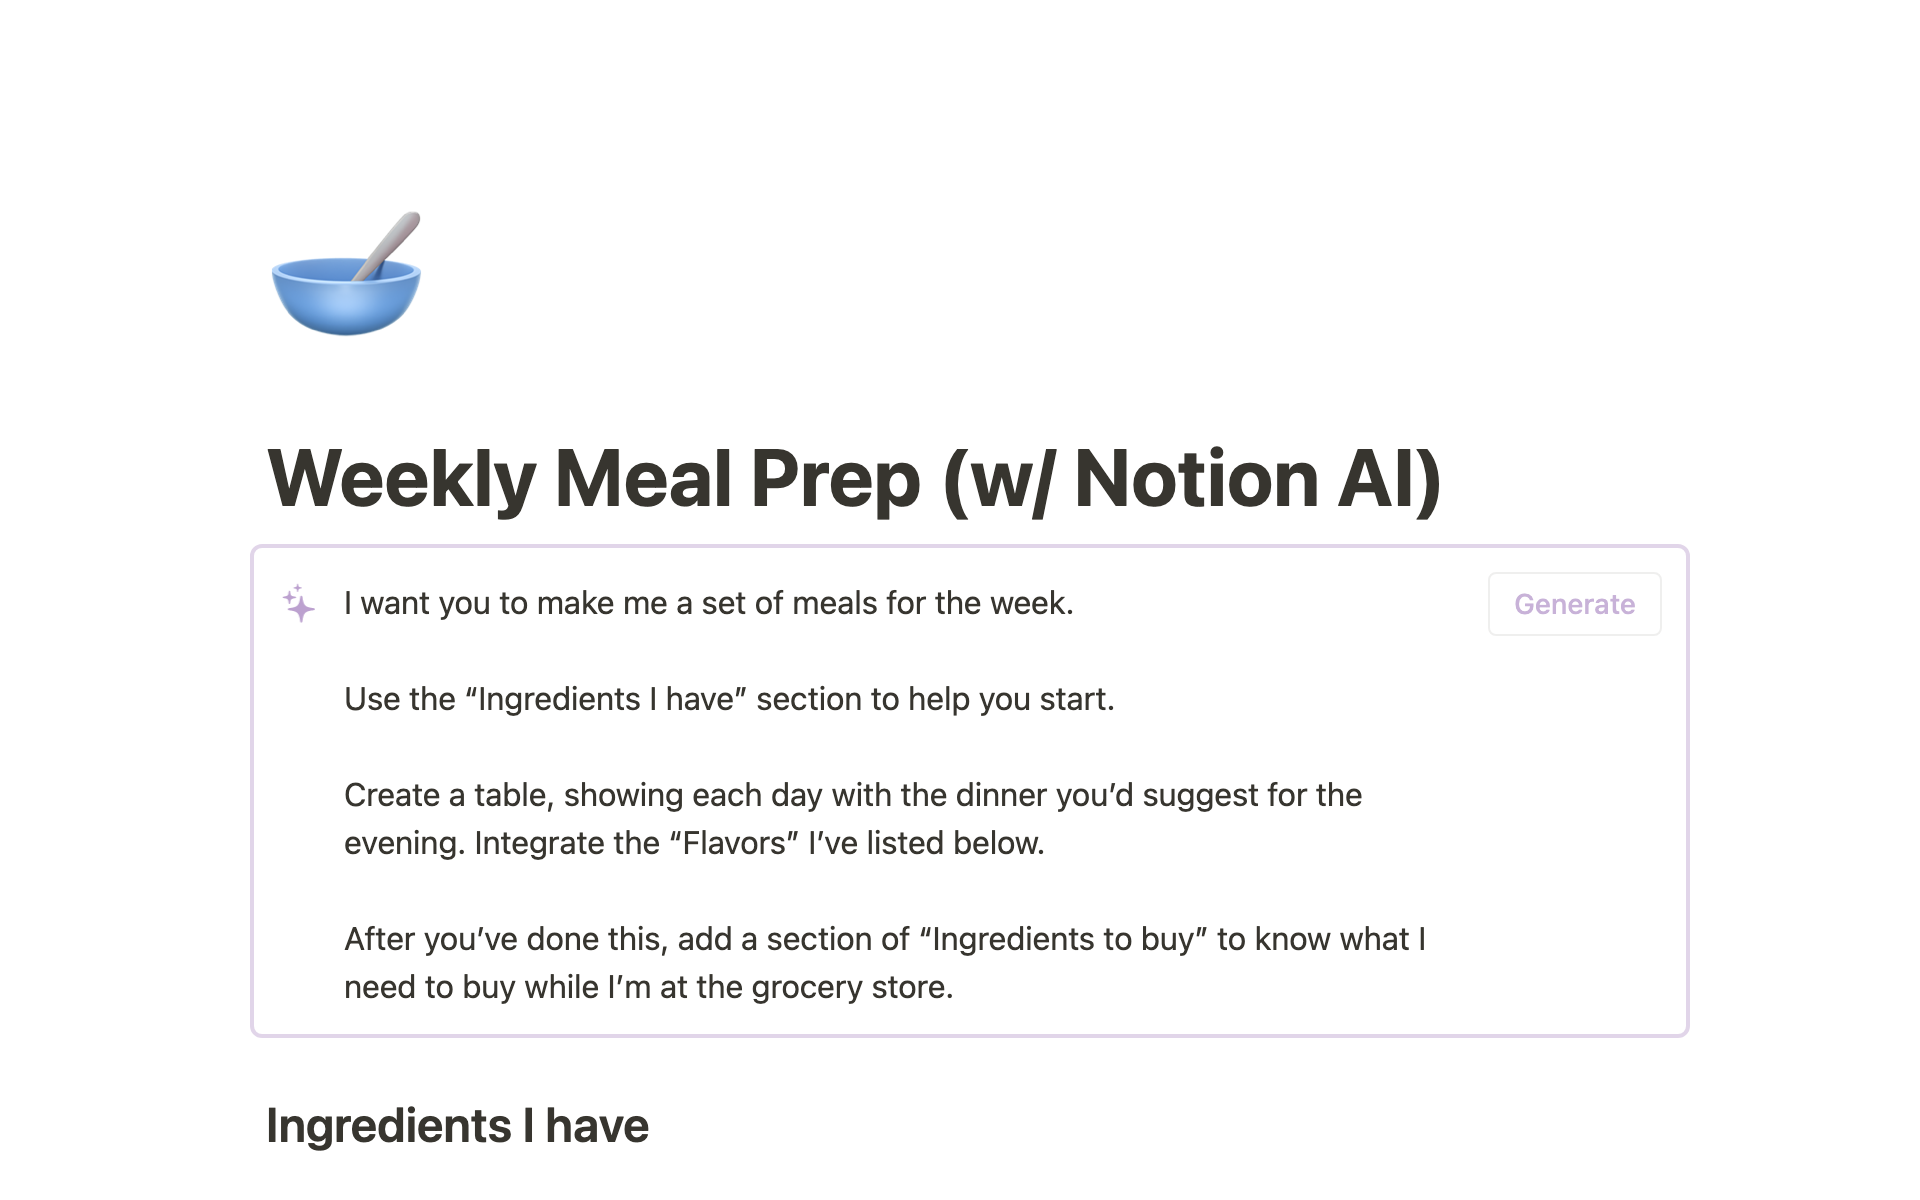 Planning meals for the week can be really challenging process. Let AI spice up your diet!